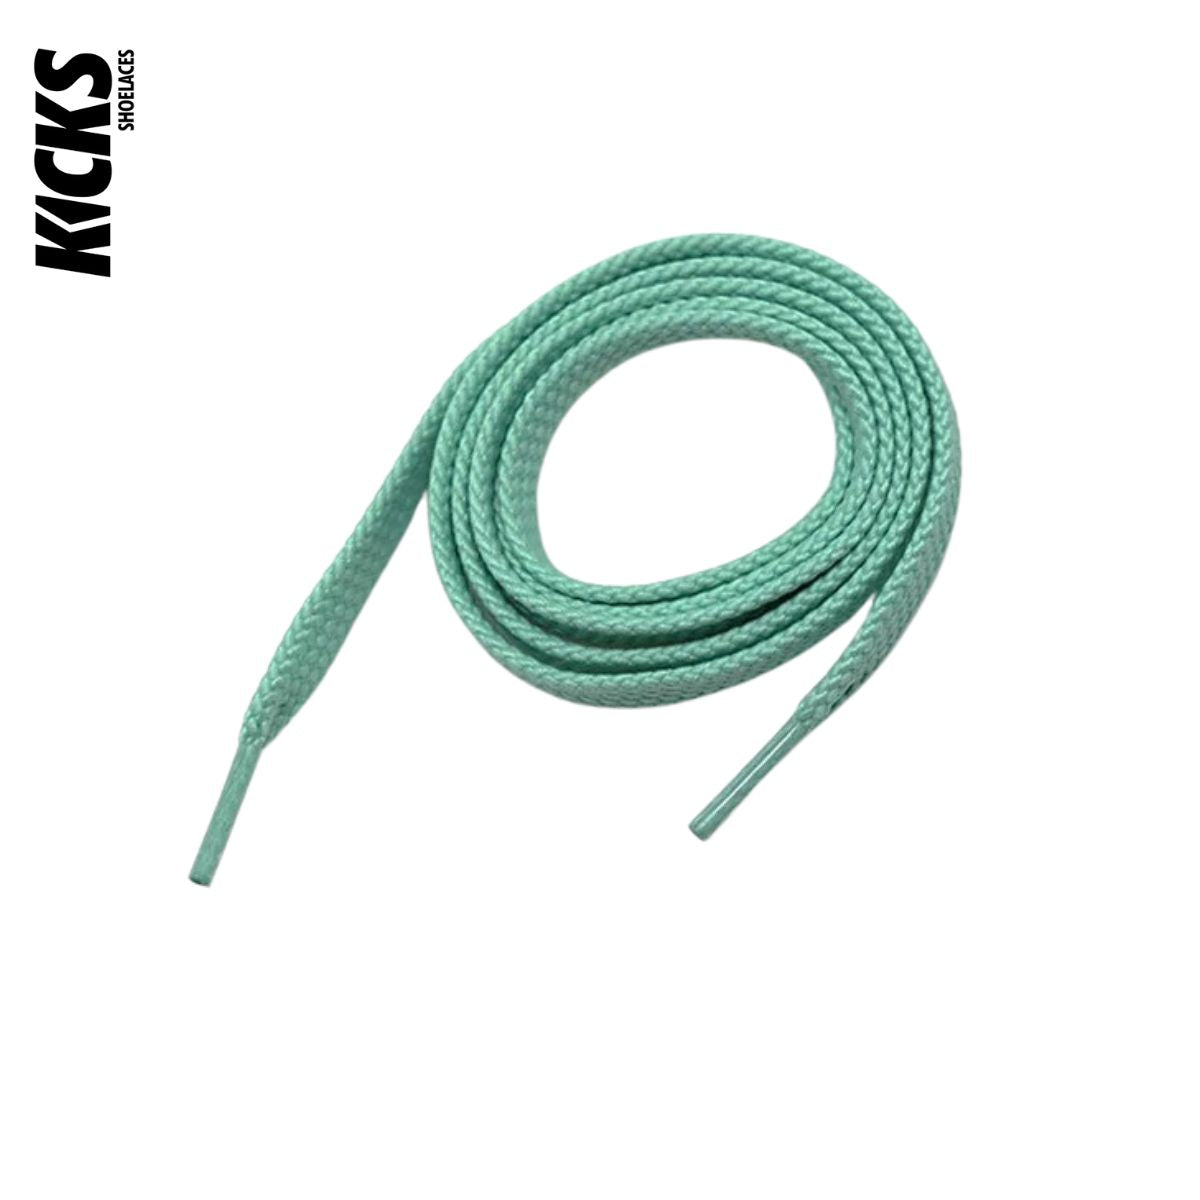 New Balance 1500 Replacement Shoelaces